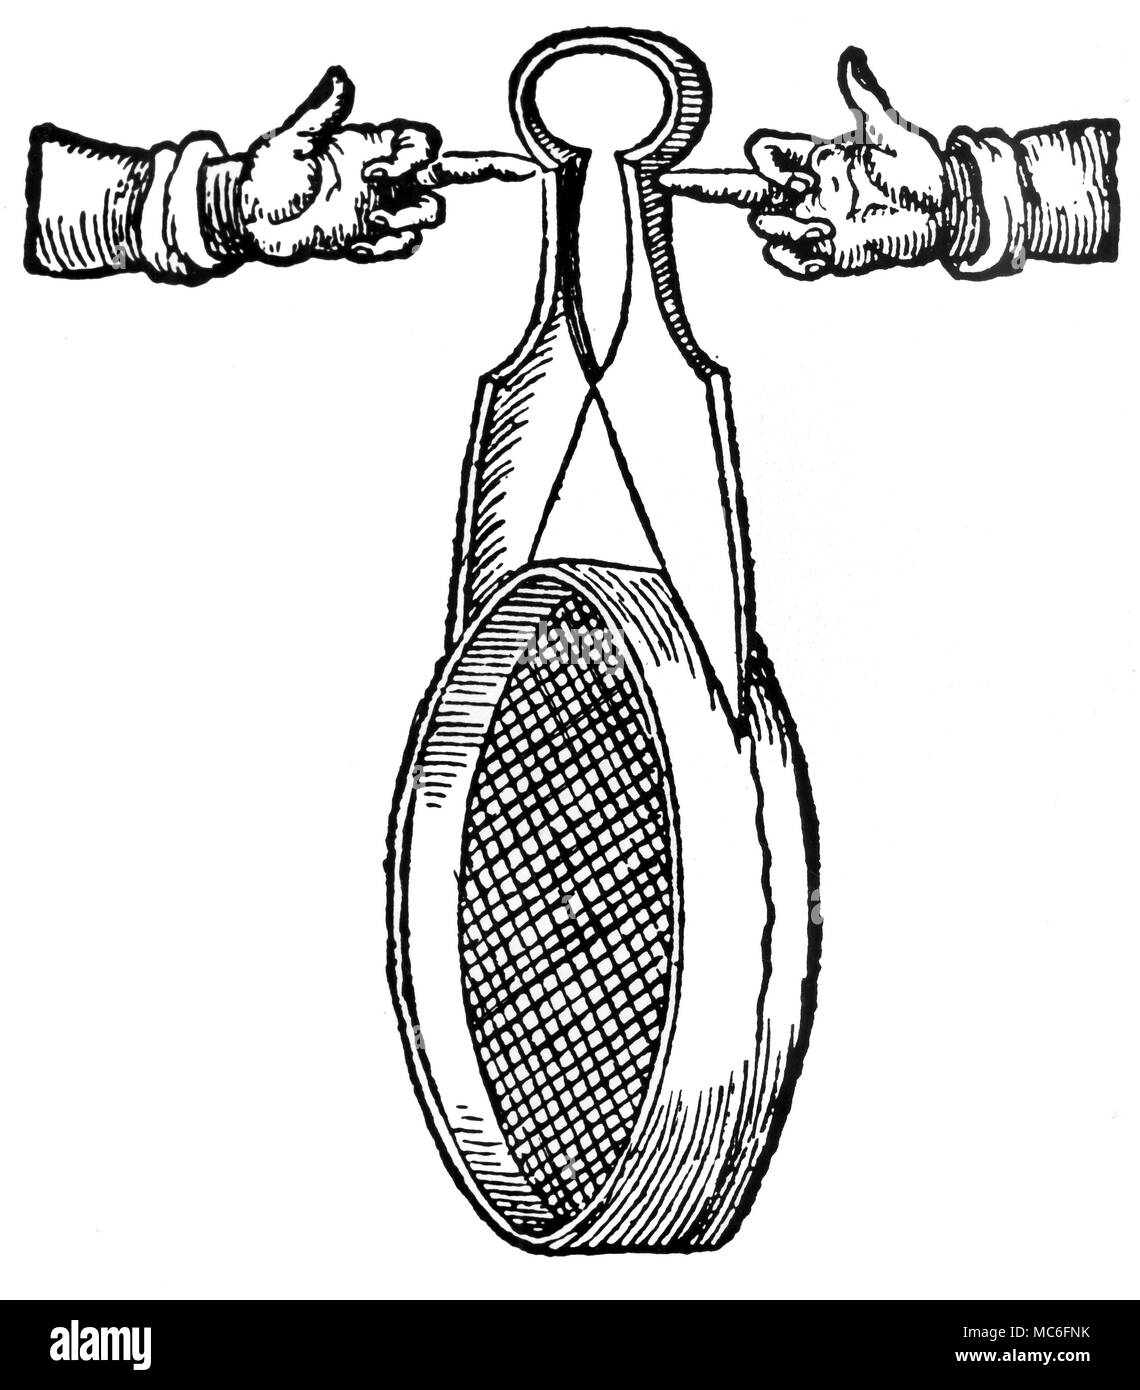 Coscinomancy, or sieve-turning, as a means of divination. When held in the right way, the sieve will gyrate in response to questions: the method seems tohave been used successfully in the past to reveal the identity of thieves. The diagram is from the posthumously published writings of the great Agrippa, who was convinced that the sieve turned at the command of demons. Not all occultists agree as to how the sieve should be balanced, or even how it works. Stock Photo